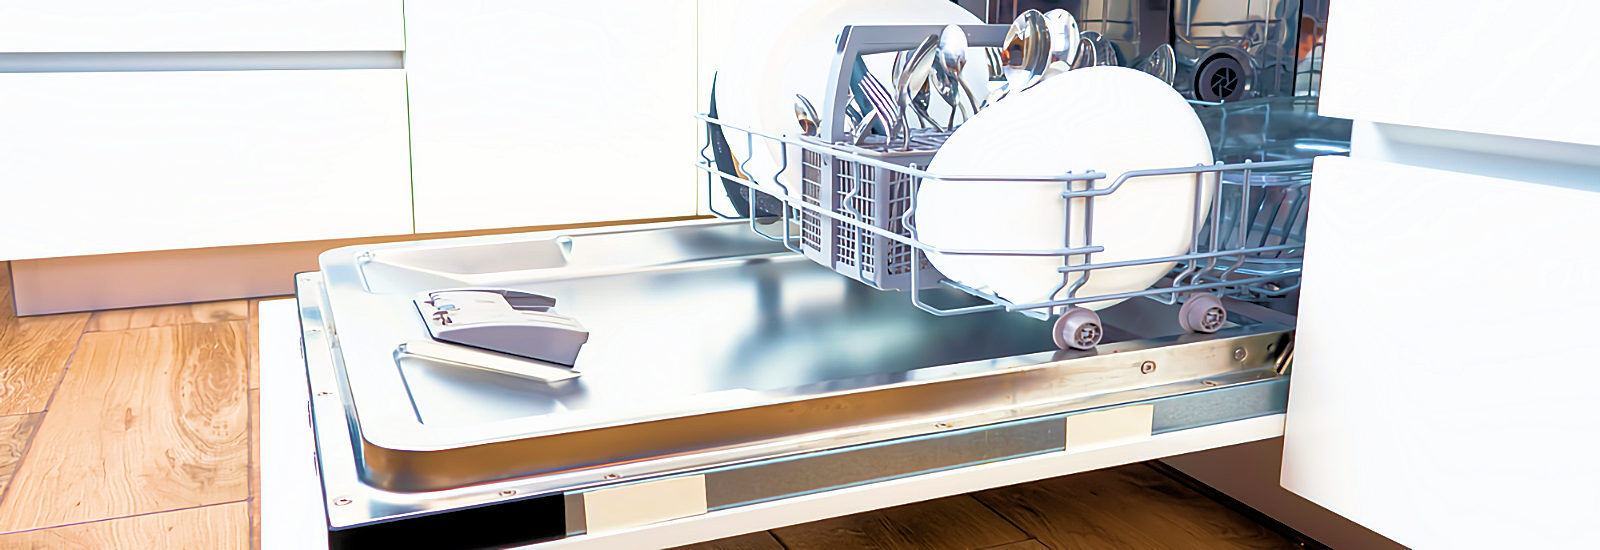 Dishwasher Repair in Melbourne and Brevard County Florida